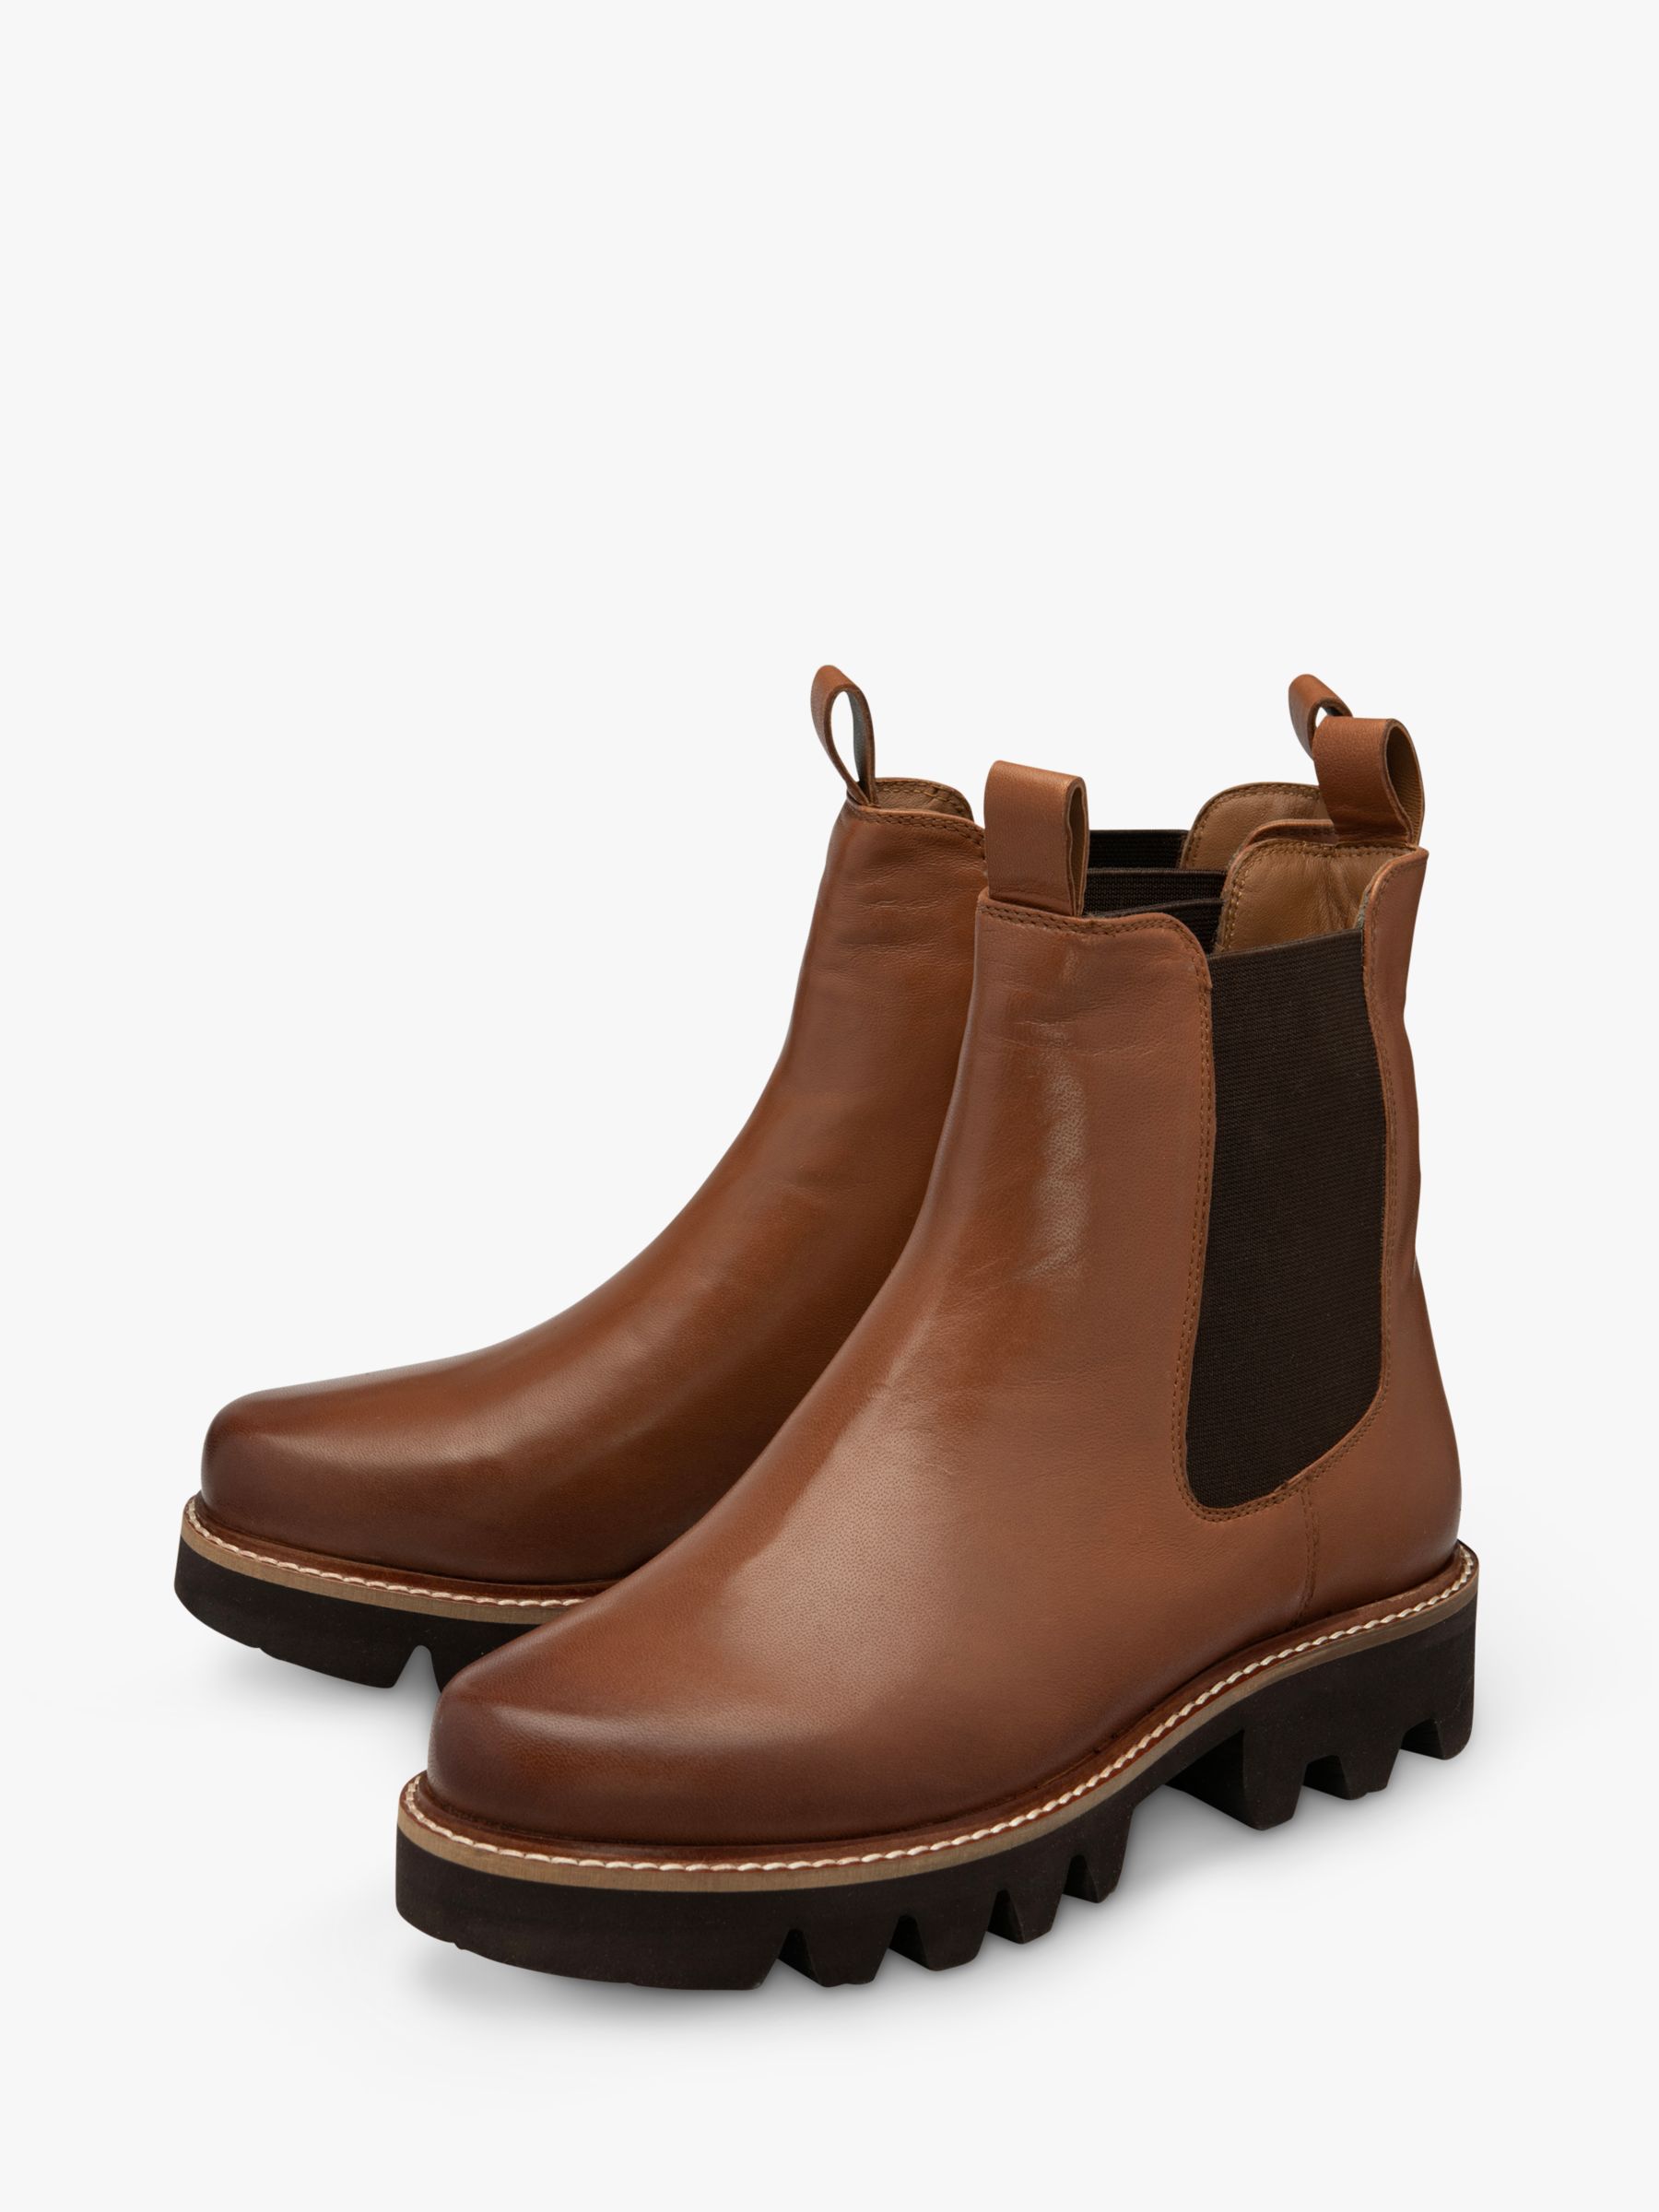 Ravel Women's Abbey Leather Ankle Boots, Tan at John Lewis & Partners